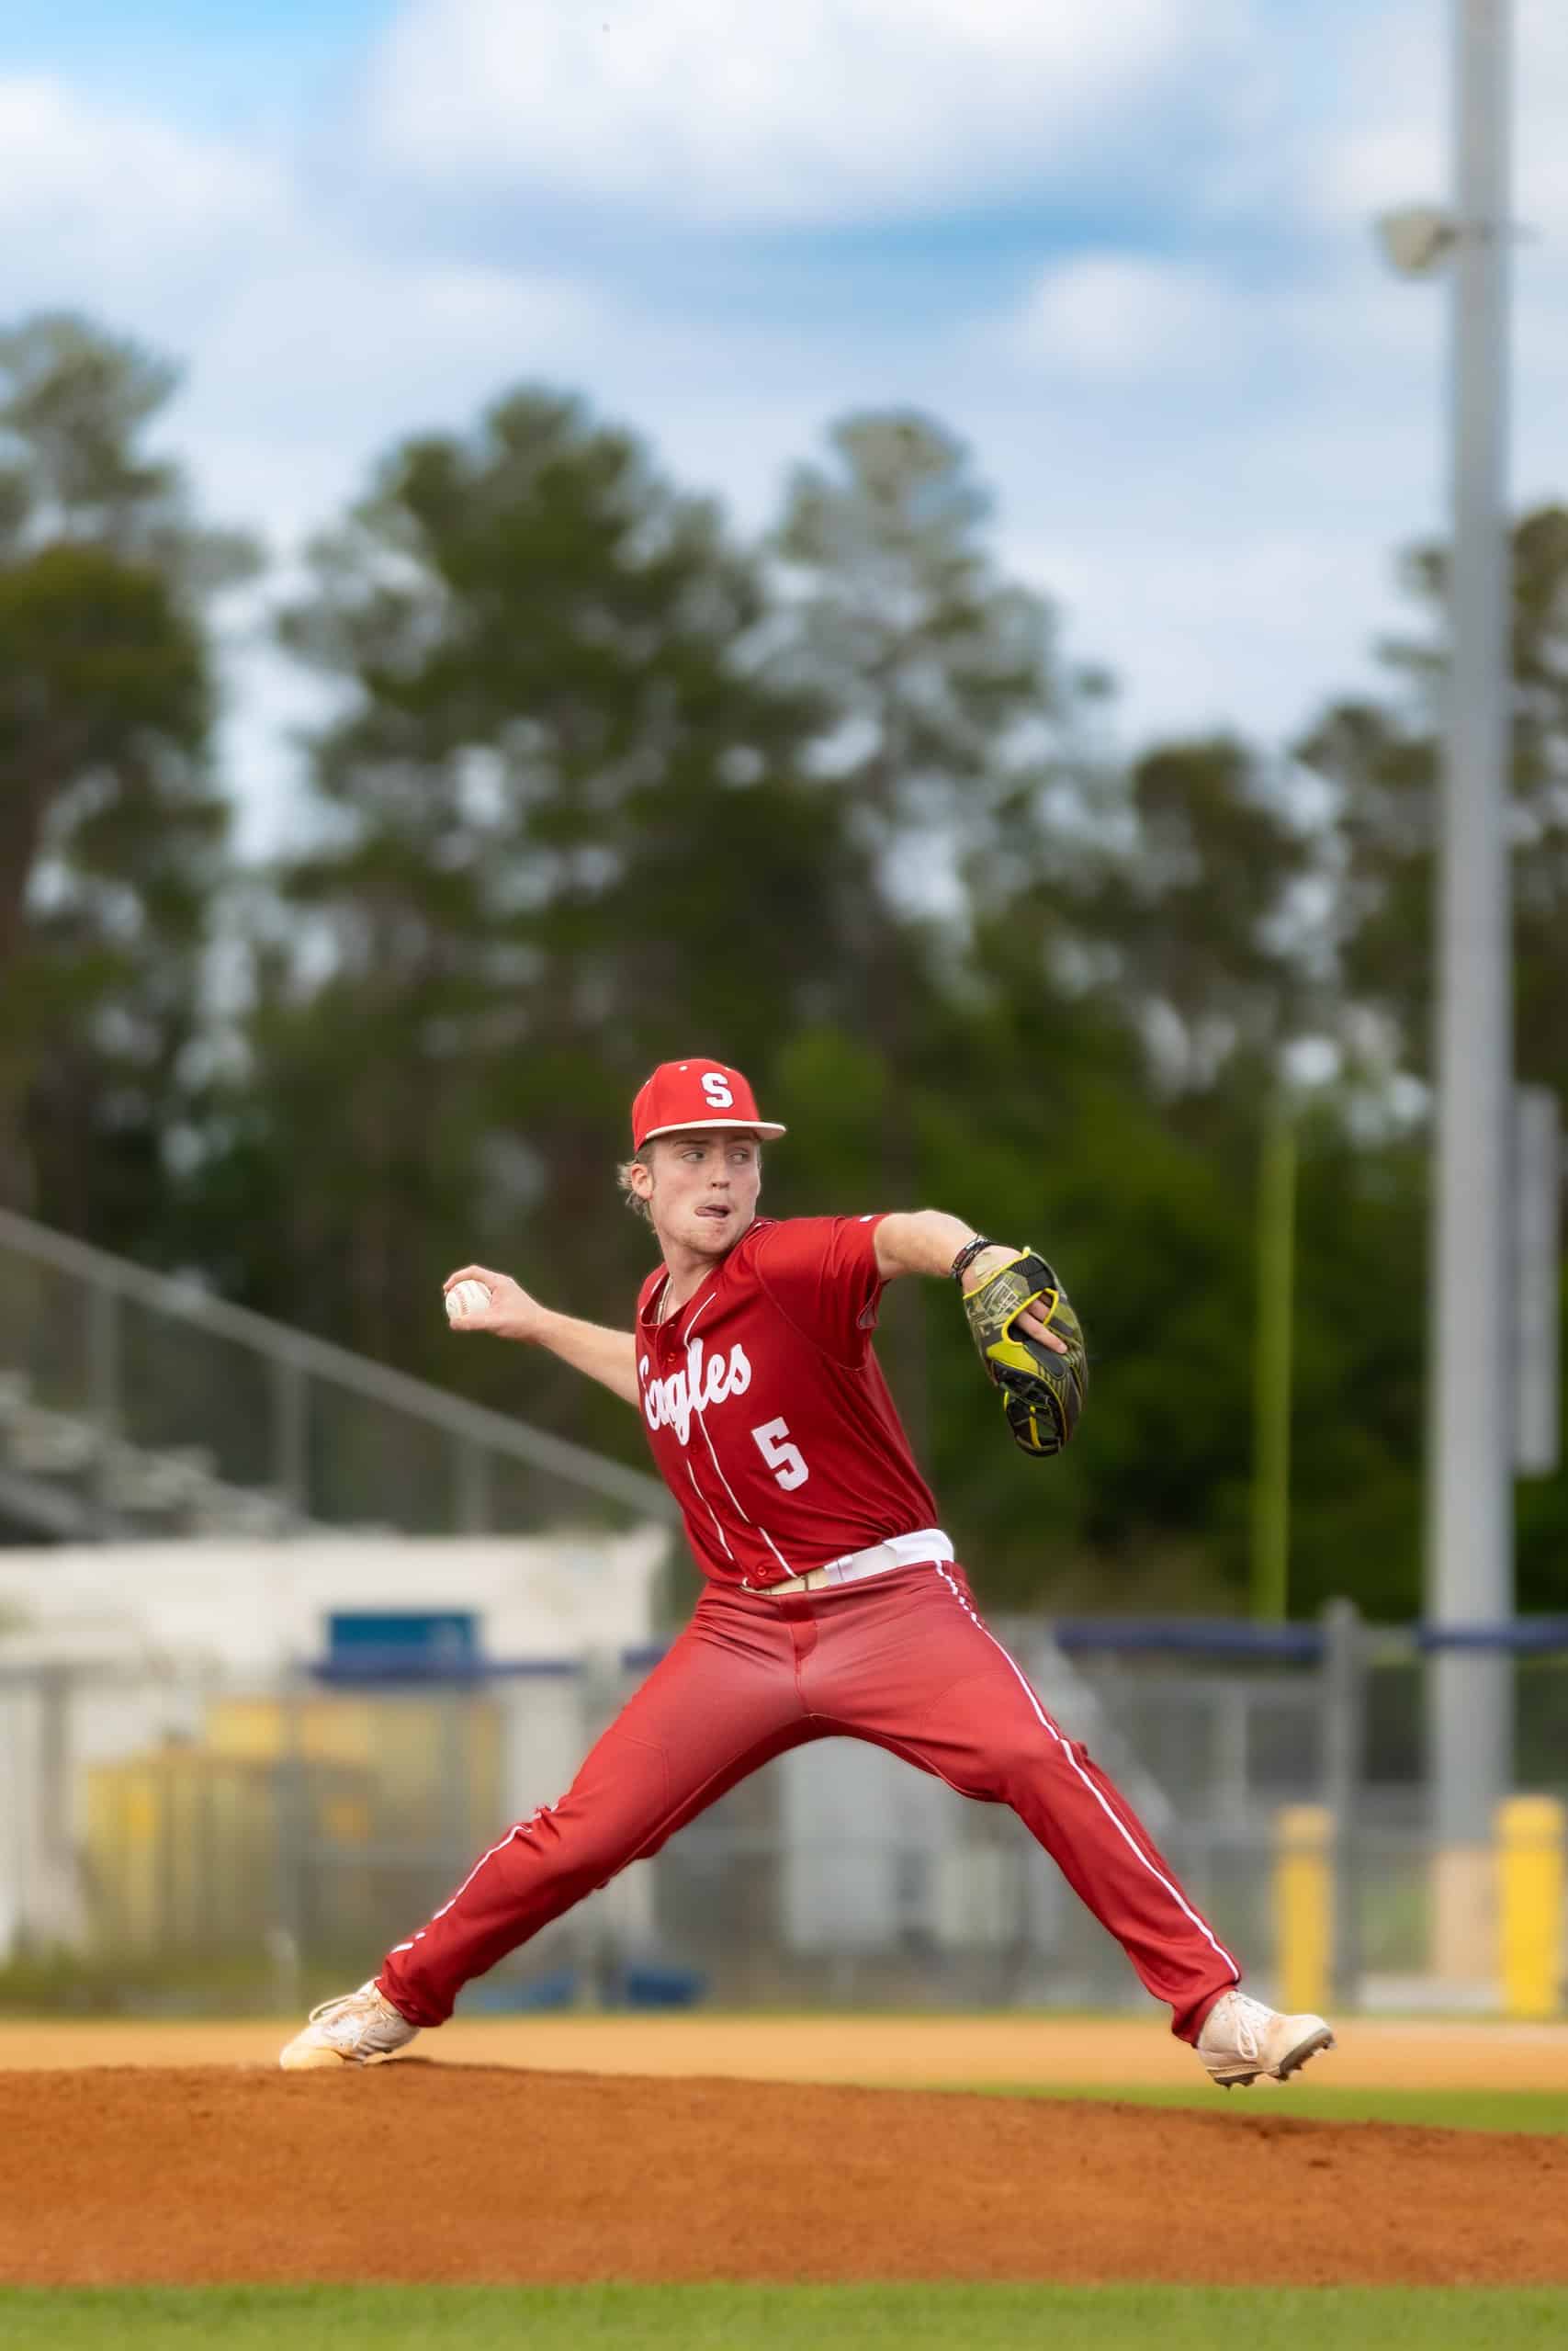 Springstead, 5, Joey Rief throws out a pitch during the Farm Bureau Invitation Tournament match. [Photo by Kelsie Johnson]